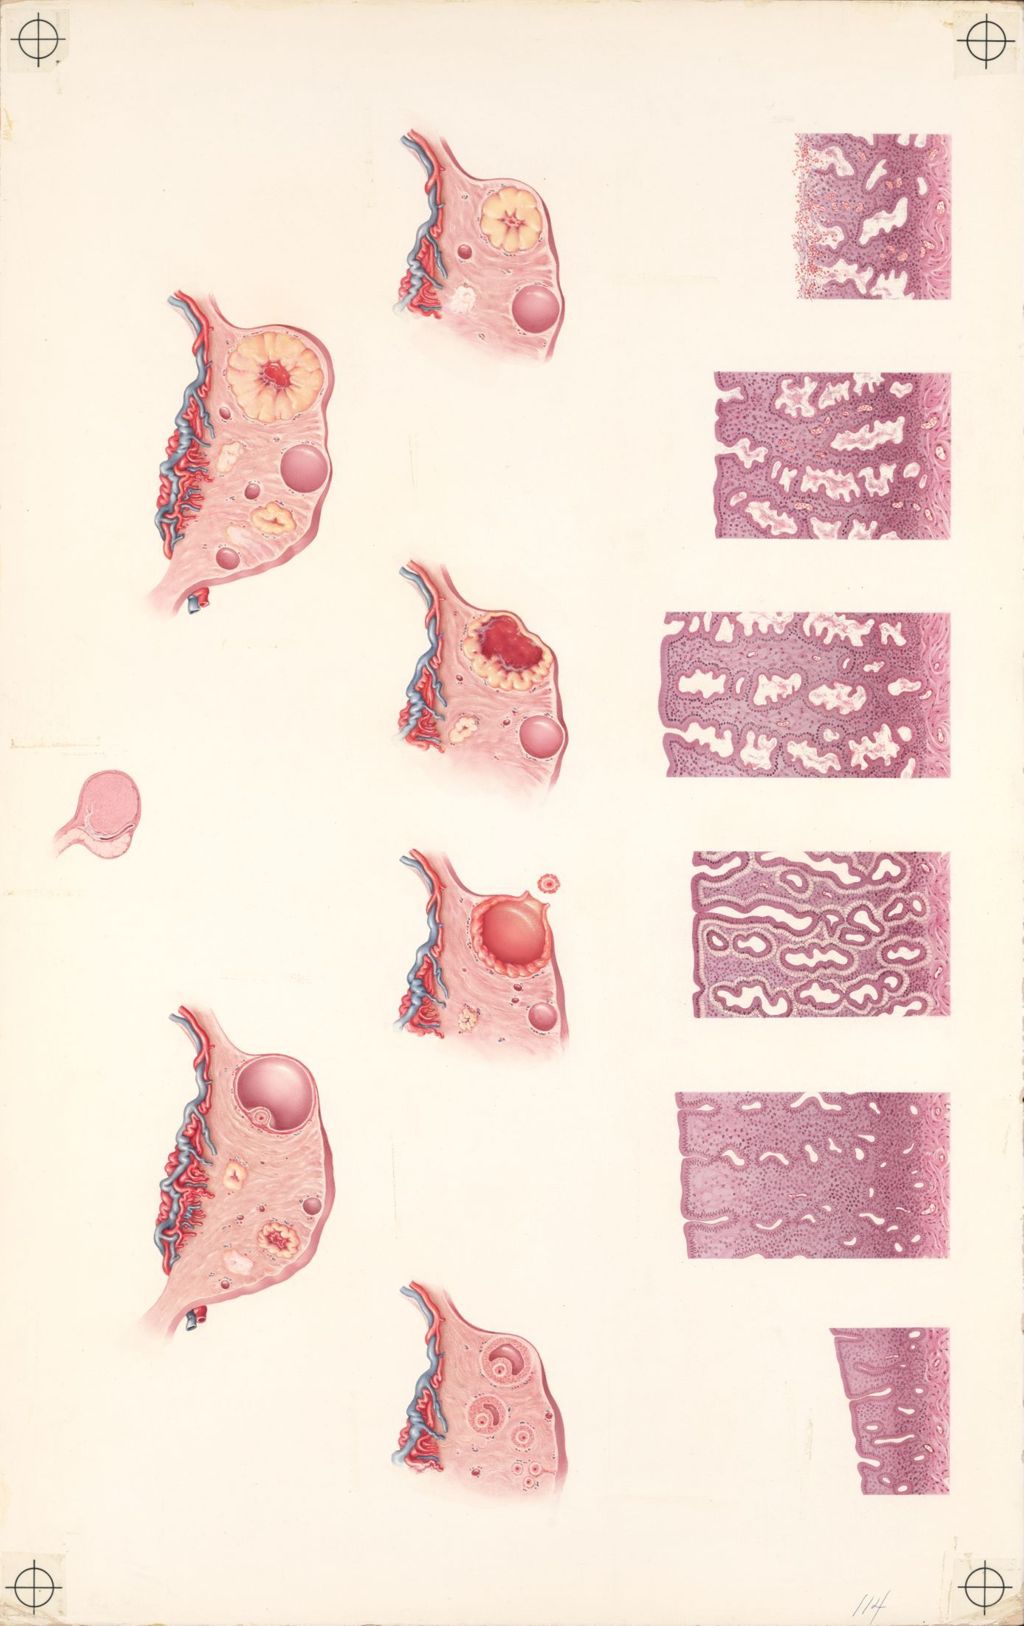 Miniature of Medical Profiles, Plate II (Of the "Lymphatics of the Female"), Pituitary-Ovarian Relationships During the Menstrual Cycle